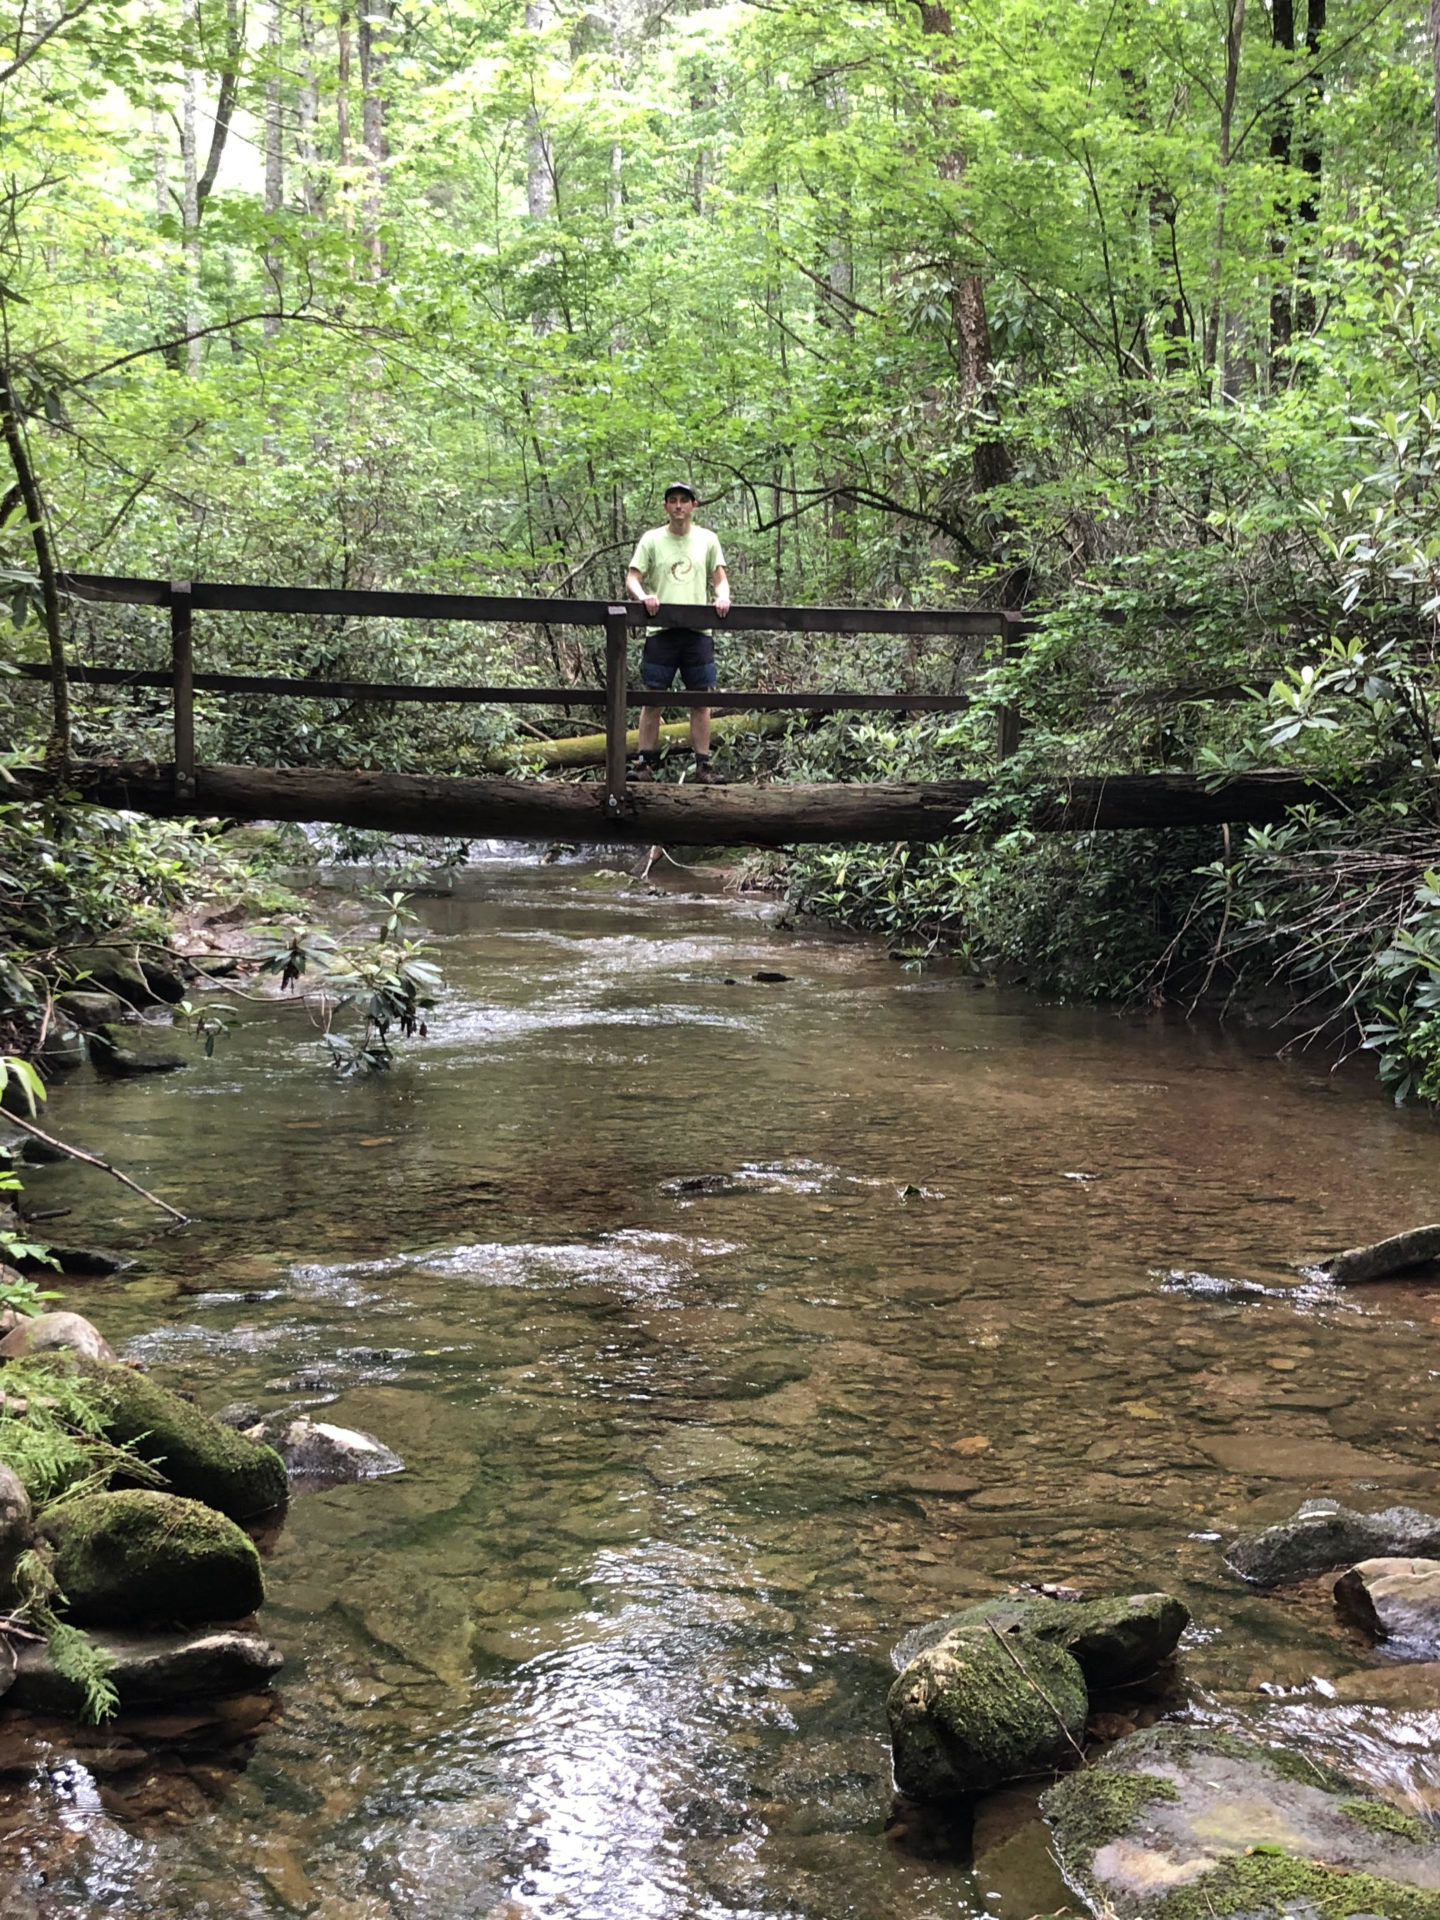 Man standing on a bridge over a river in the woods